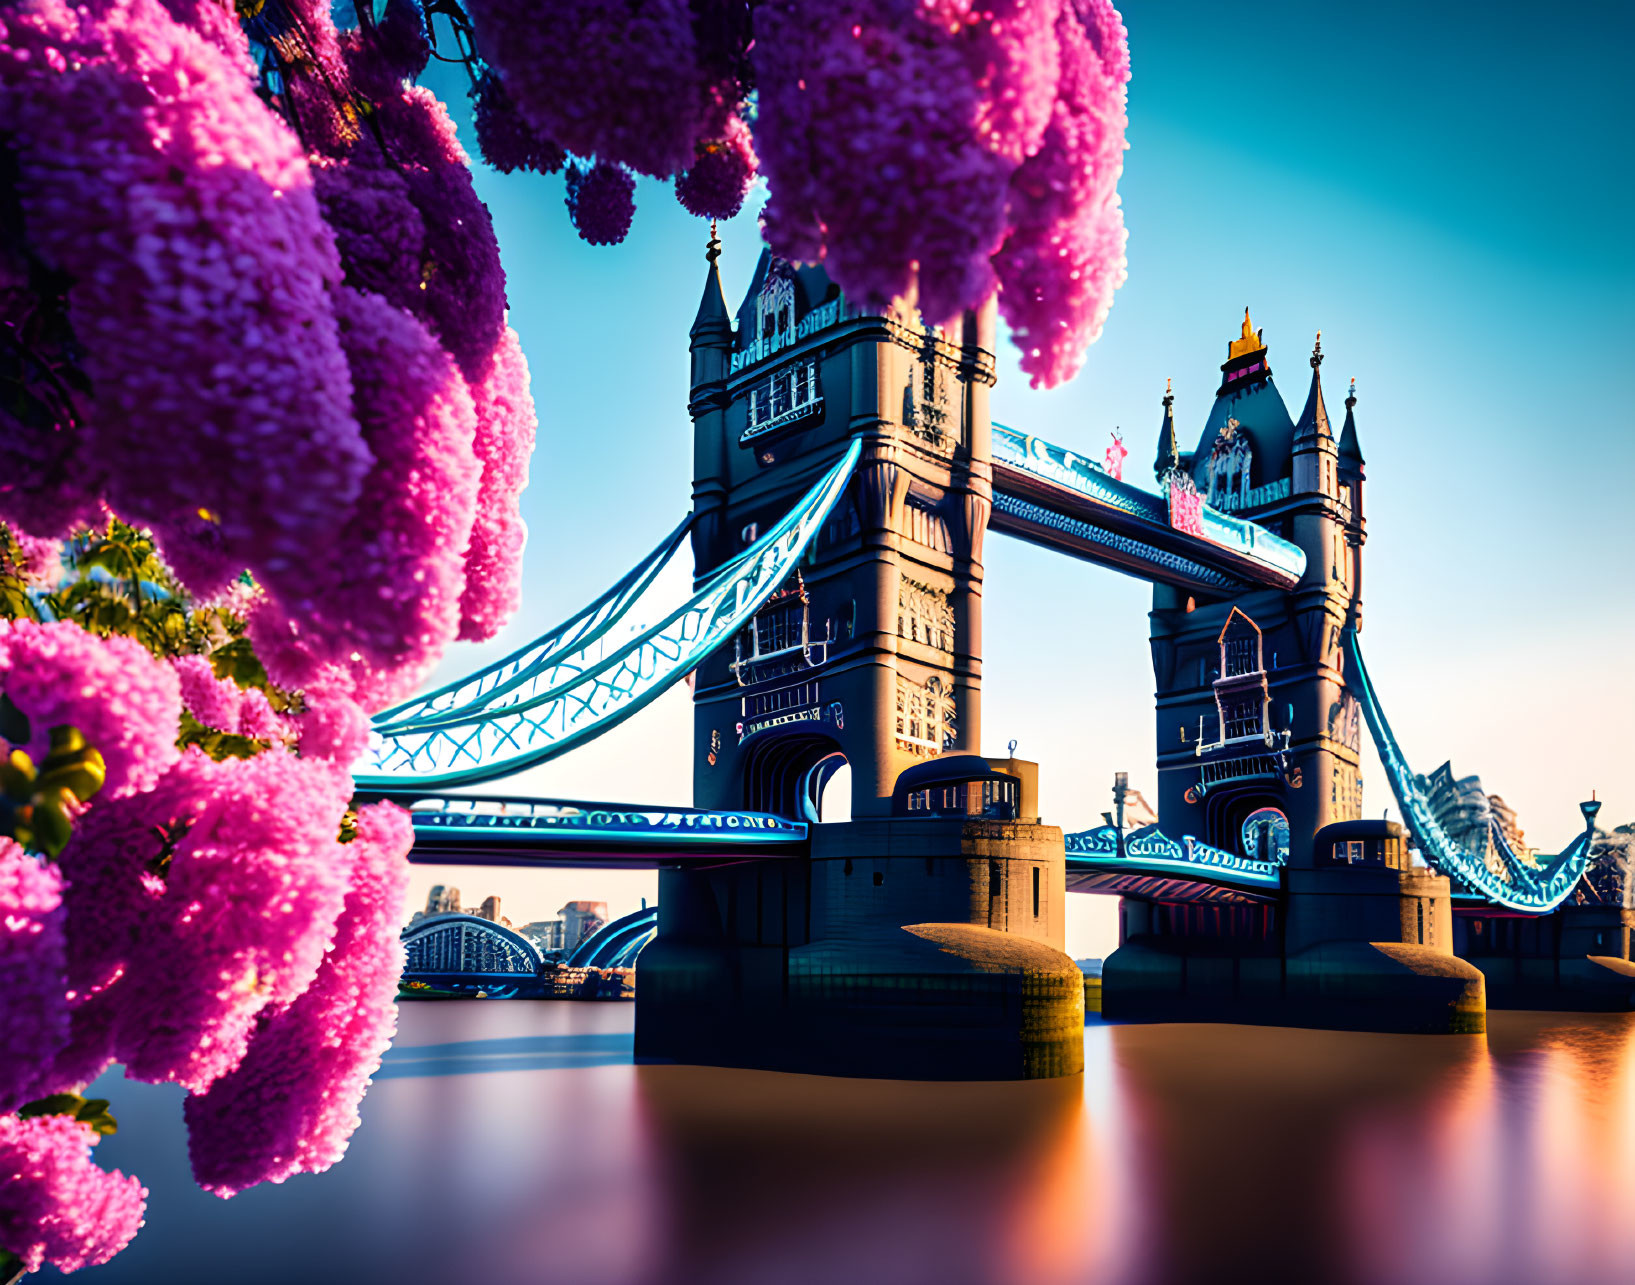 Tower Bridge in London with pink blossom trees against blue sky